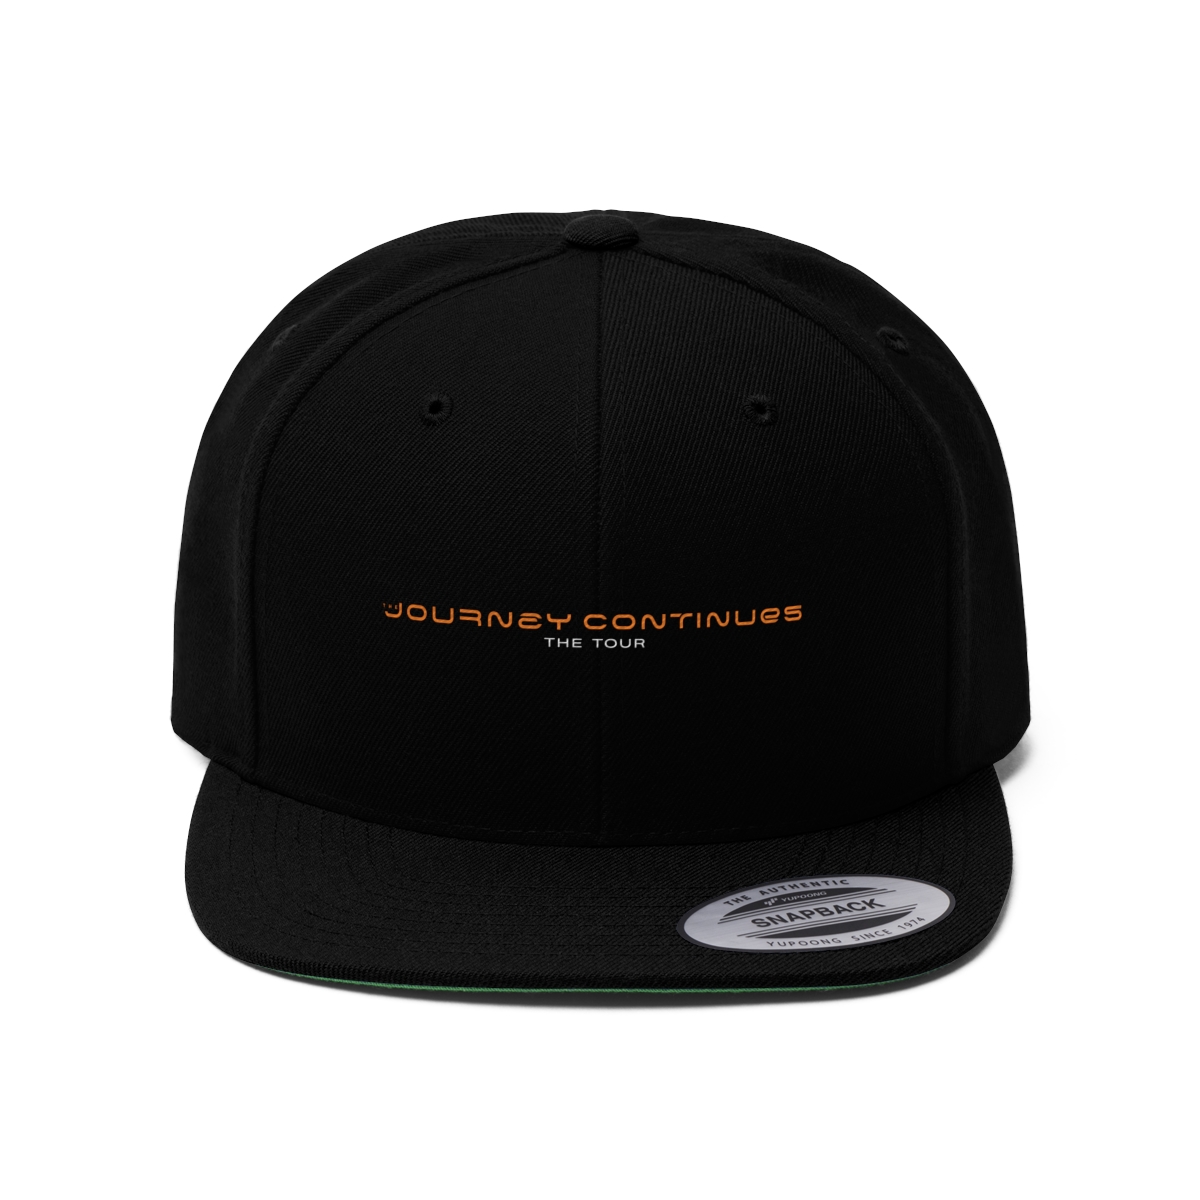 The Journey Continues Tour Snapback product main image